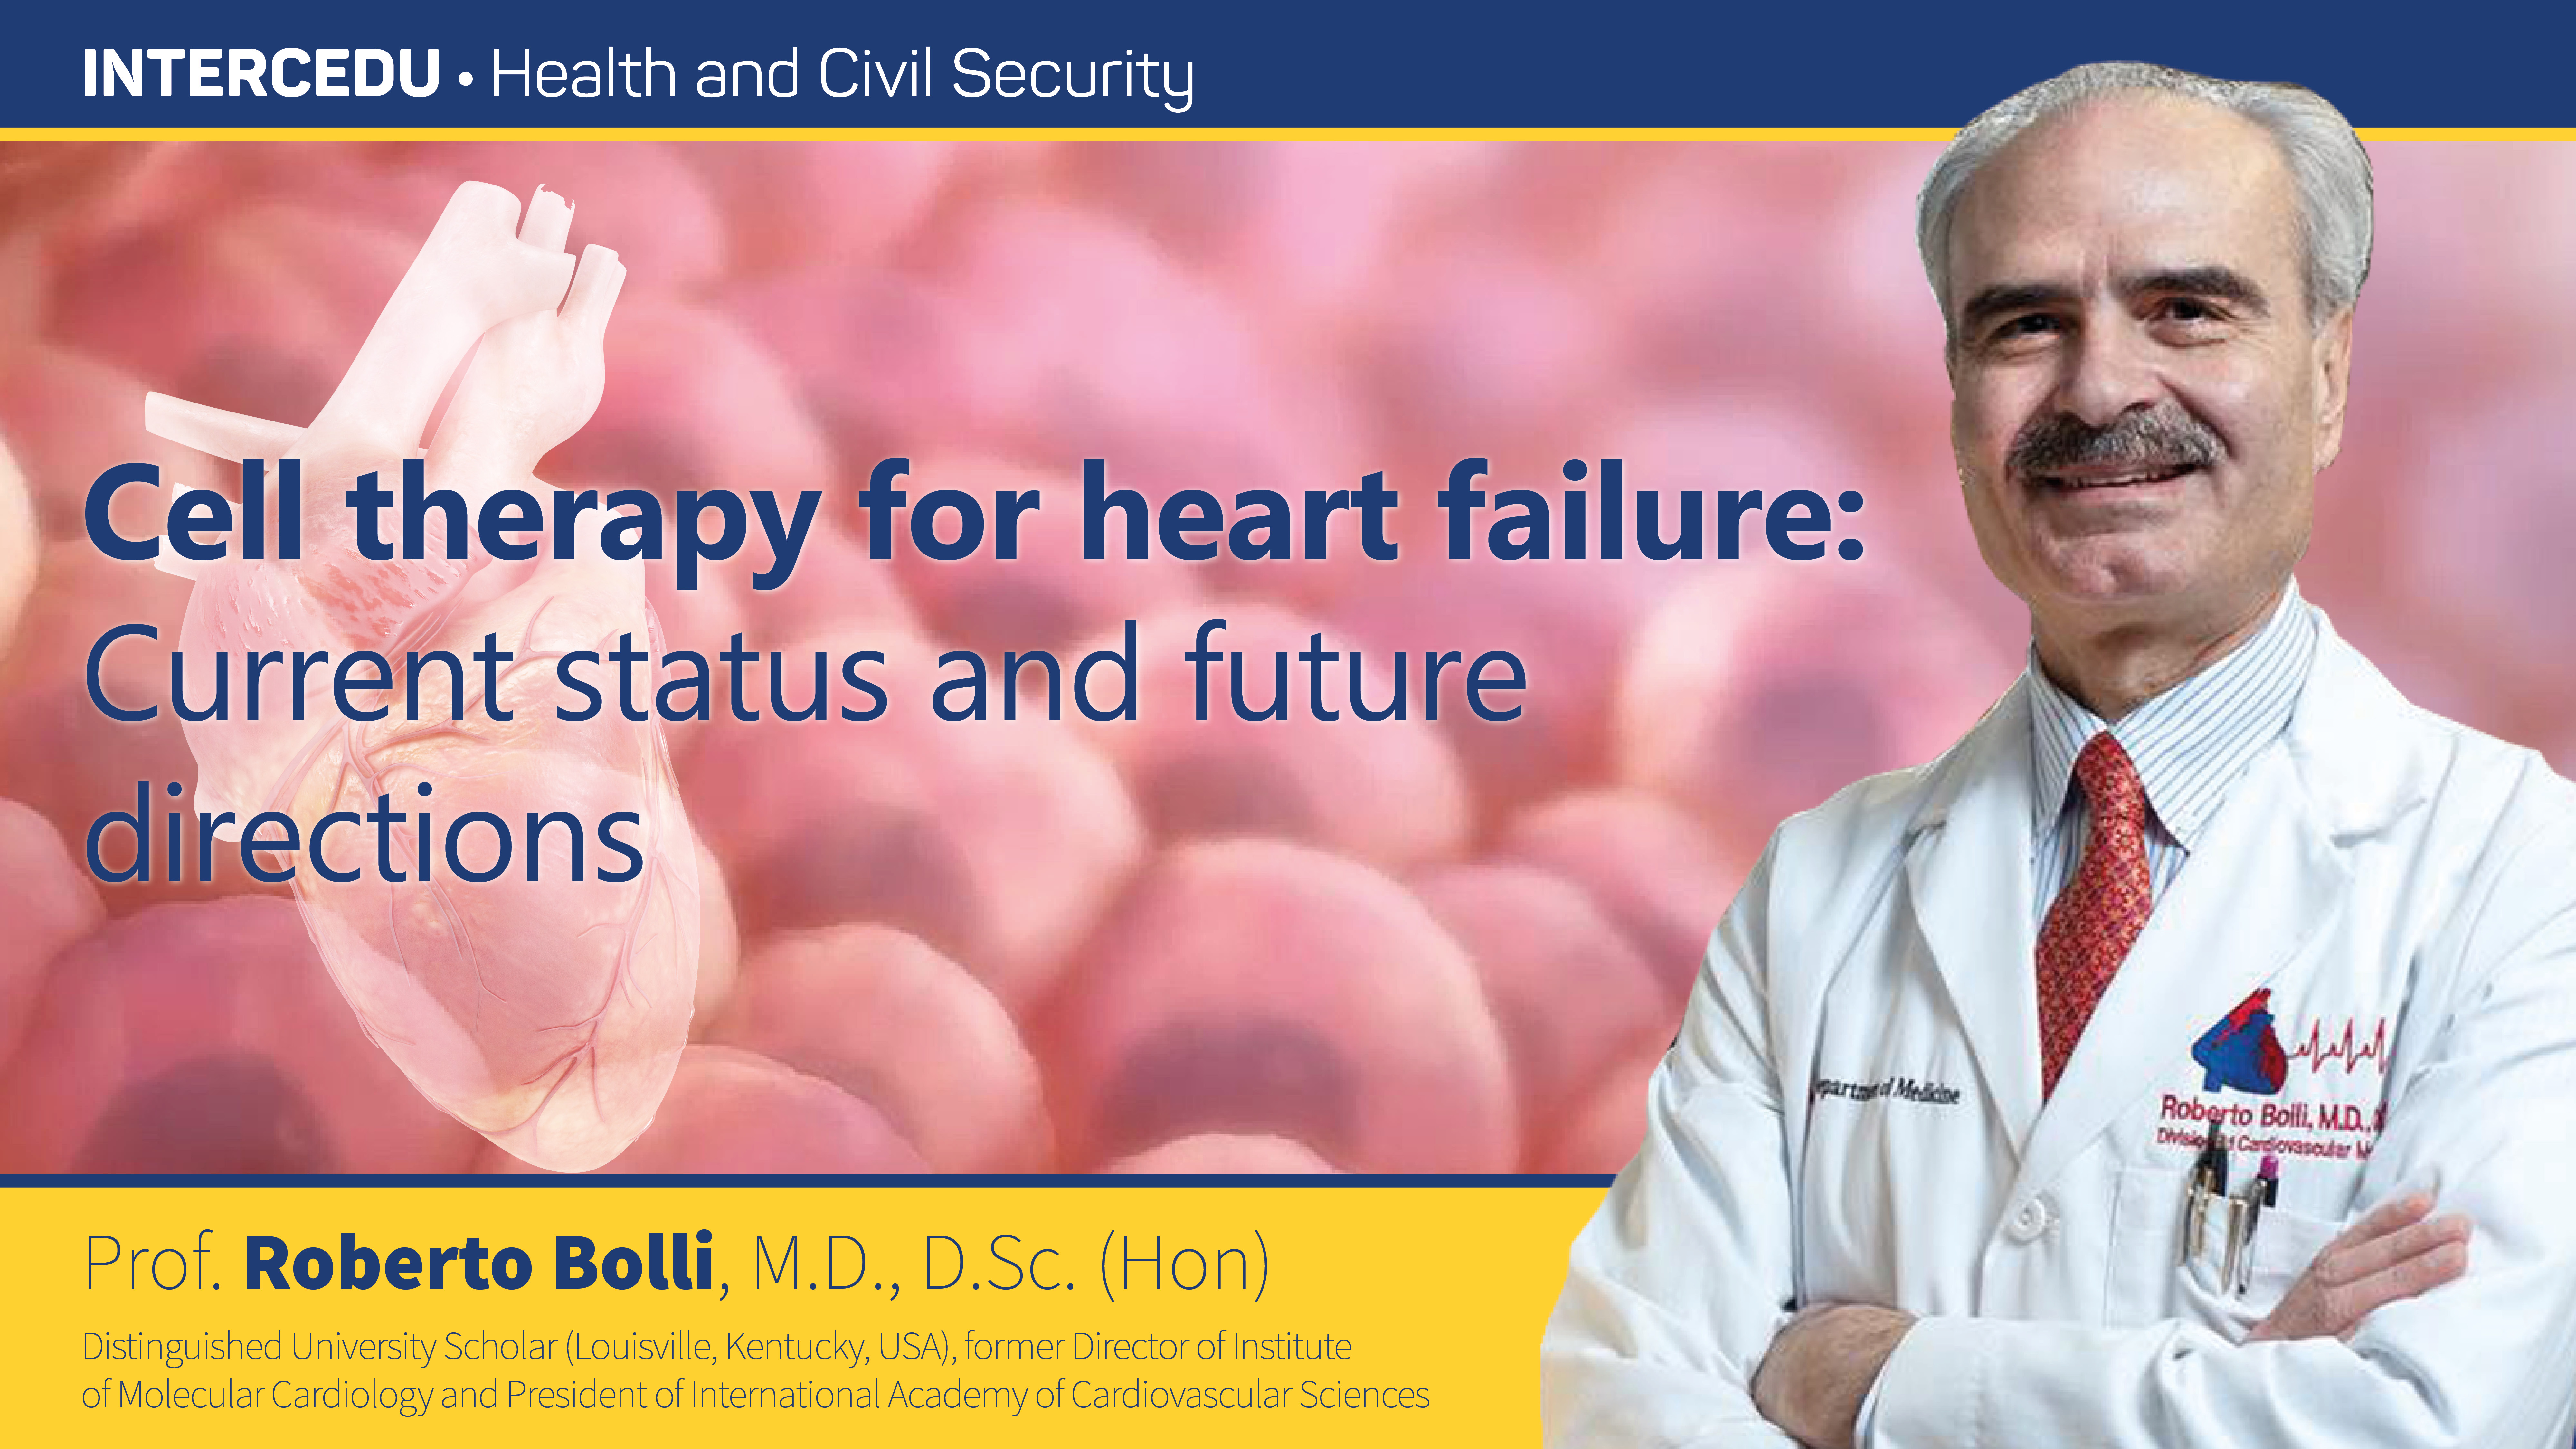 Roberto Bolli: Cell therapy for heart failure: Current status and future directions